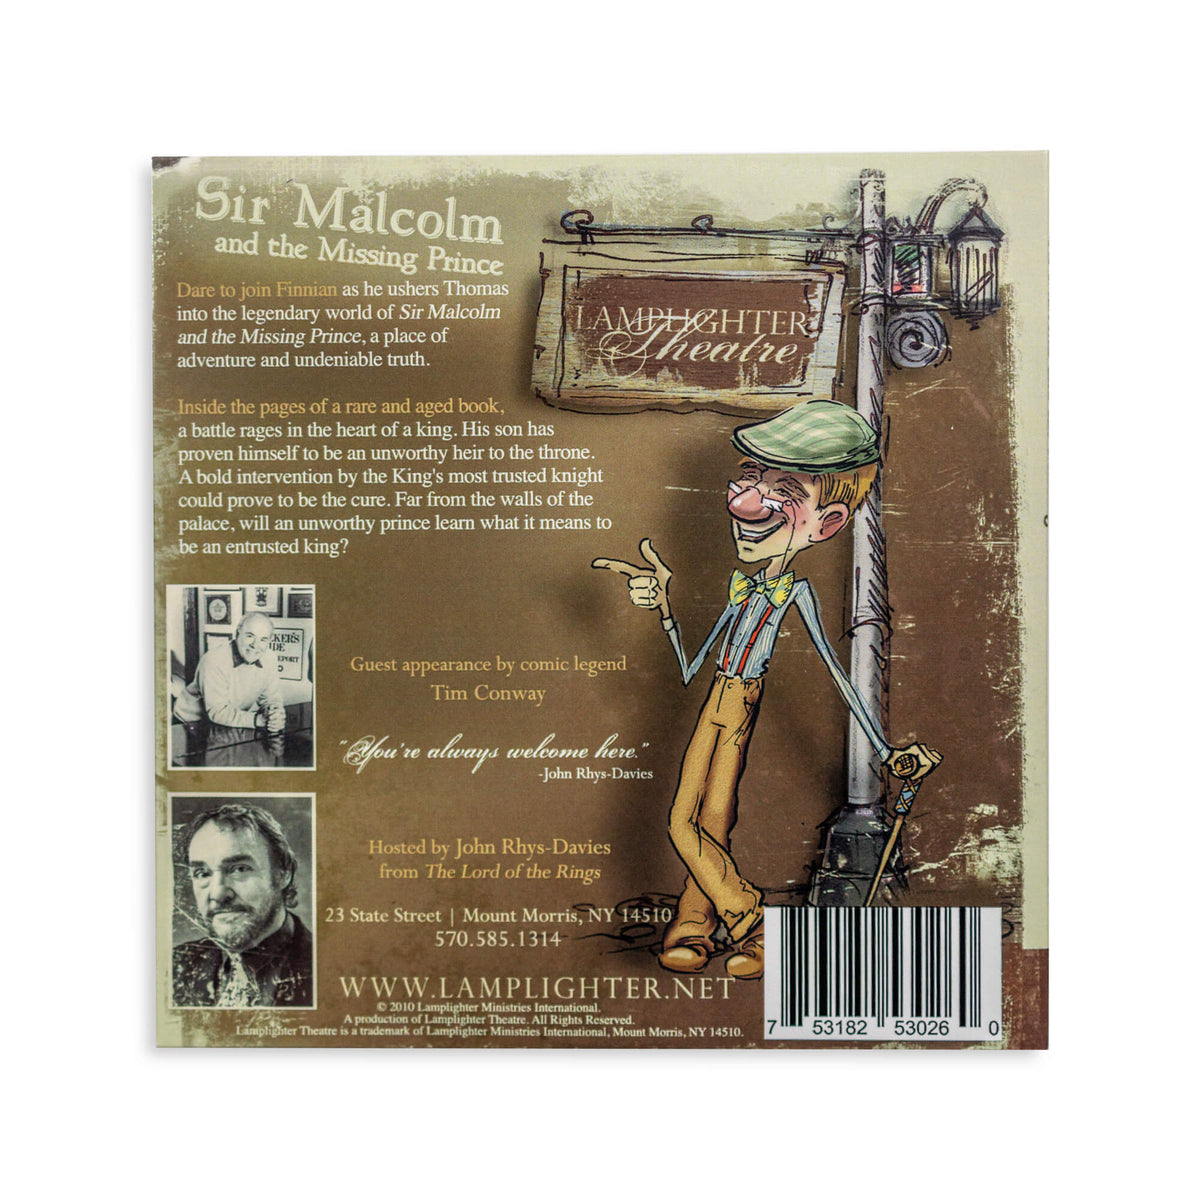 Sir Malcolm and the Missing Prince Audio drama CD (back)